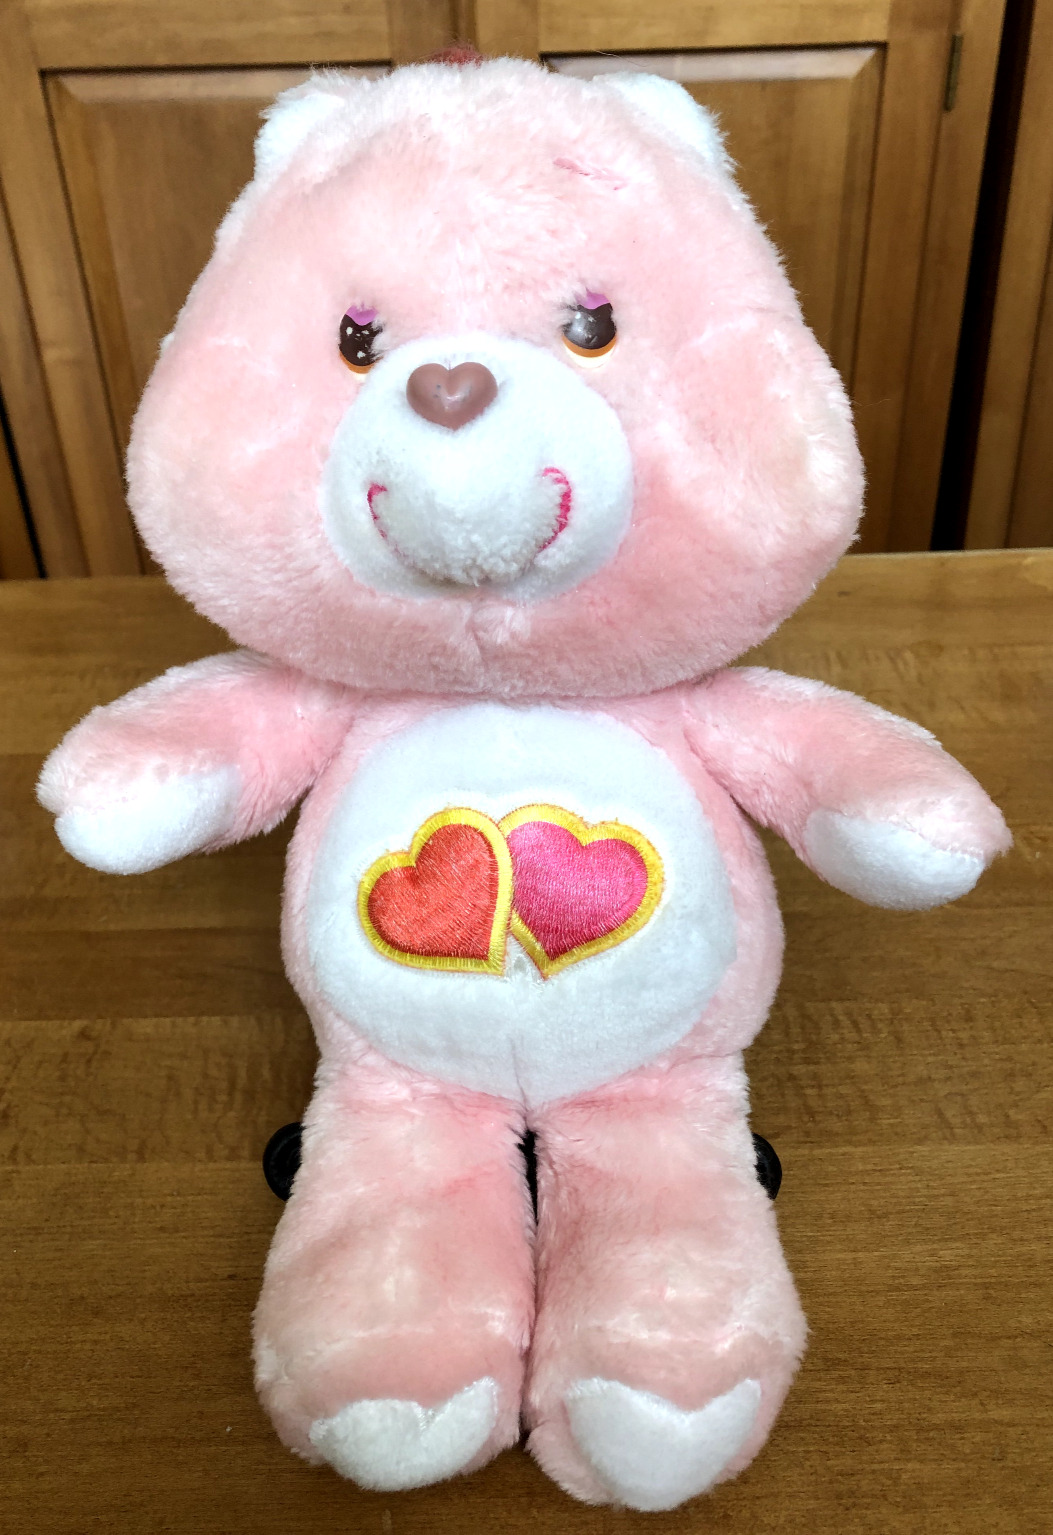 Vintage 1983 Kenner Pink  Love-a-Lot Care Bear Plush Stuffed Animal - 14 Inches